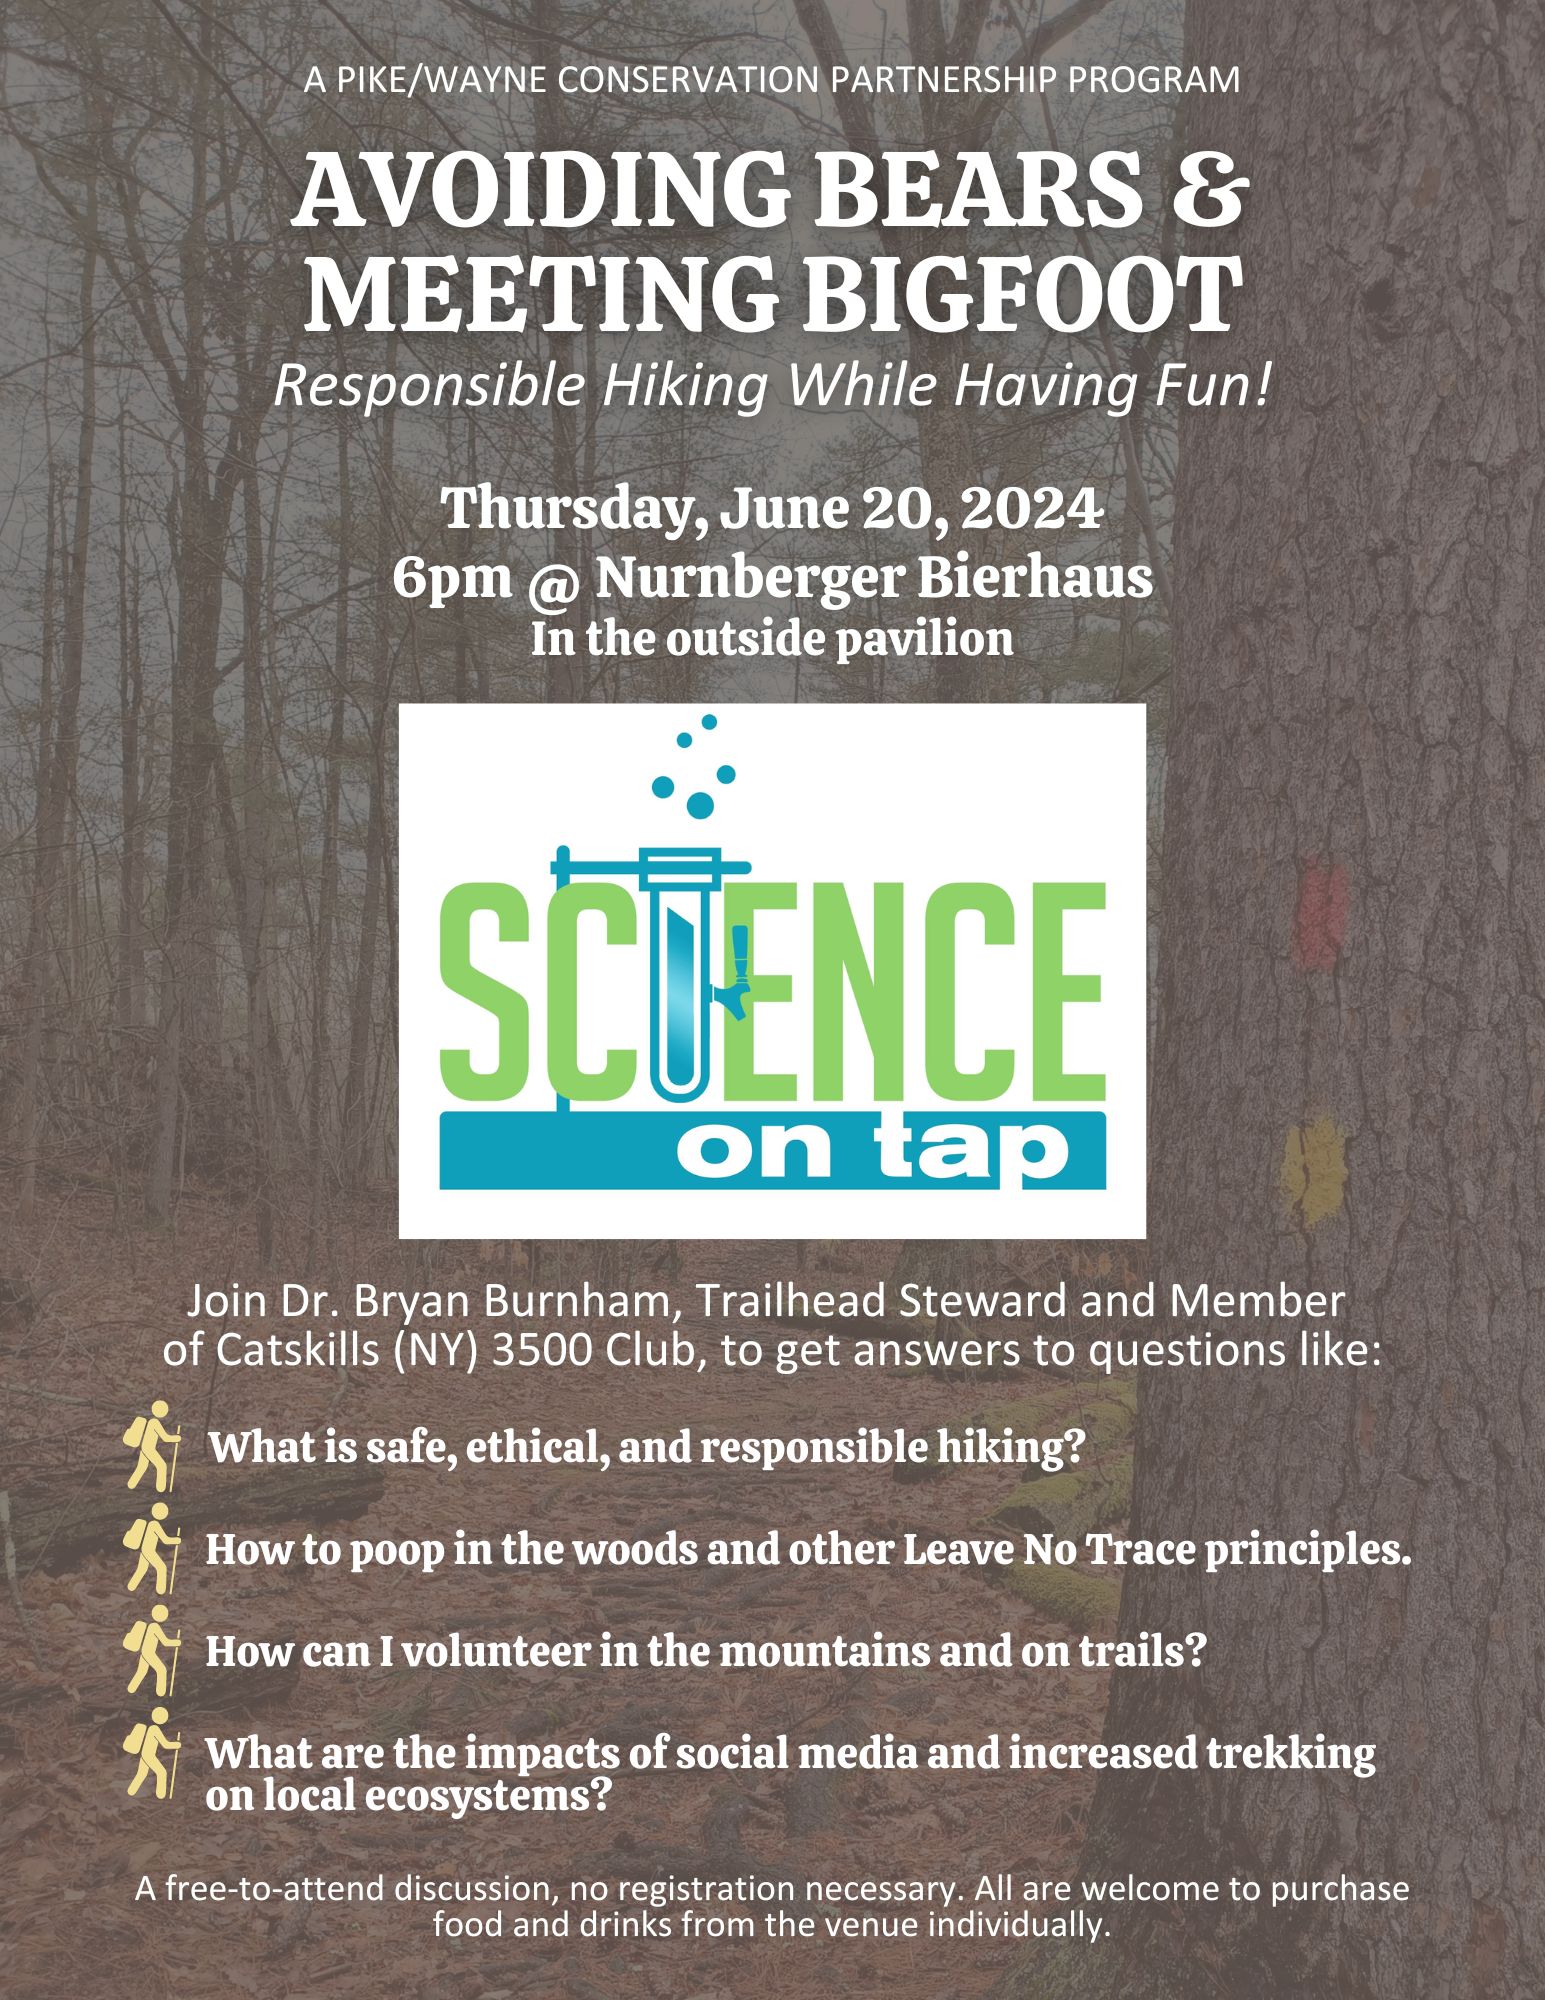 Flyer for the June Science on Tap program Avoiding Bears and Meeting Bigfoot with the text "A Pike/Wayne Conservation Partnership Program, Thursday, June 20, 2024, 6pm at Nurnberger Bierhaus In the outside pavilion. Join Dr. Bryan Burnham, Trailhead Steward and Member of Catskills (NY) 3500 Club, to get answers to questions like: What is safe, ethical, and responsible hiking? What is safe, ethical, and responsible hiking? How to poop in the woods and other Leave No Trace principles. How can I volunteer in the mountains and on trails? What are the impacts of social media and increased trekking on local ecosystems? What is safe, ethical, and responsible hiking? How to poop in the woods and other Leave No Trace principles. How can I volunteer in the mountains and on trails? What are the impacts of social media and increased trekking on local ecosystems? What is safe, ethical, and responsible hiking? How to poop in the woods and other Leave No Trace principles. How can I volunteer in the mountains and on trails? What are the impacts of social media and increased trekking on local ecosystems? A free-to-attend discussion, no registration necessary. All are welcome to purchase food and drinks from the venue individually.